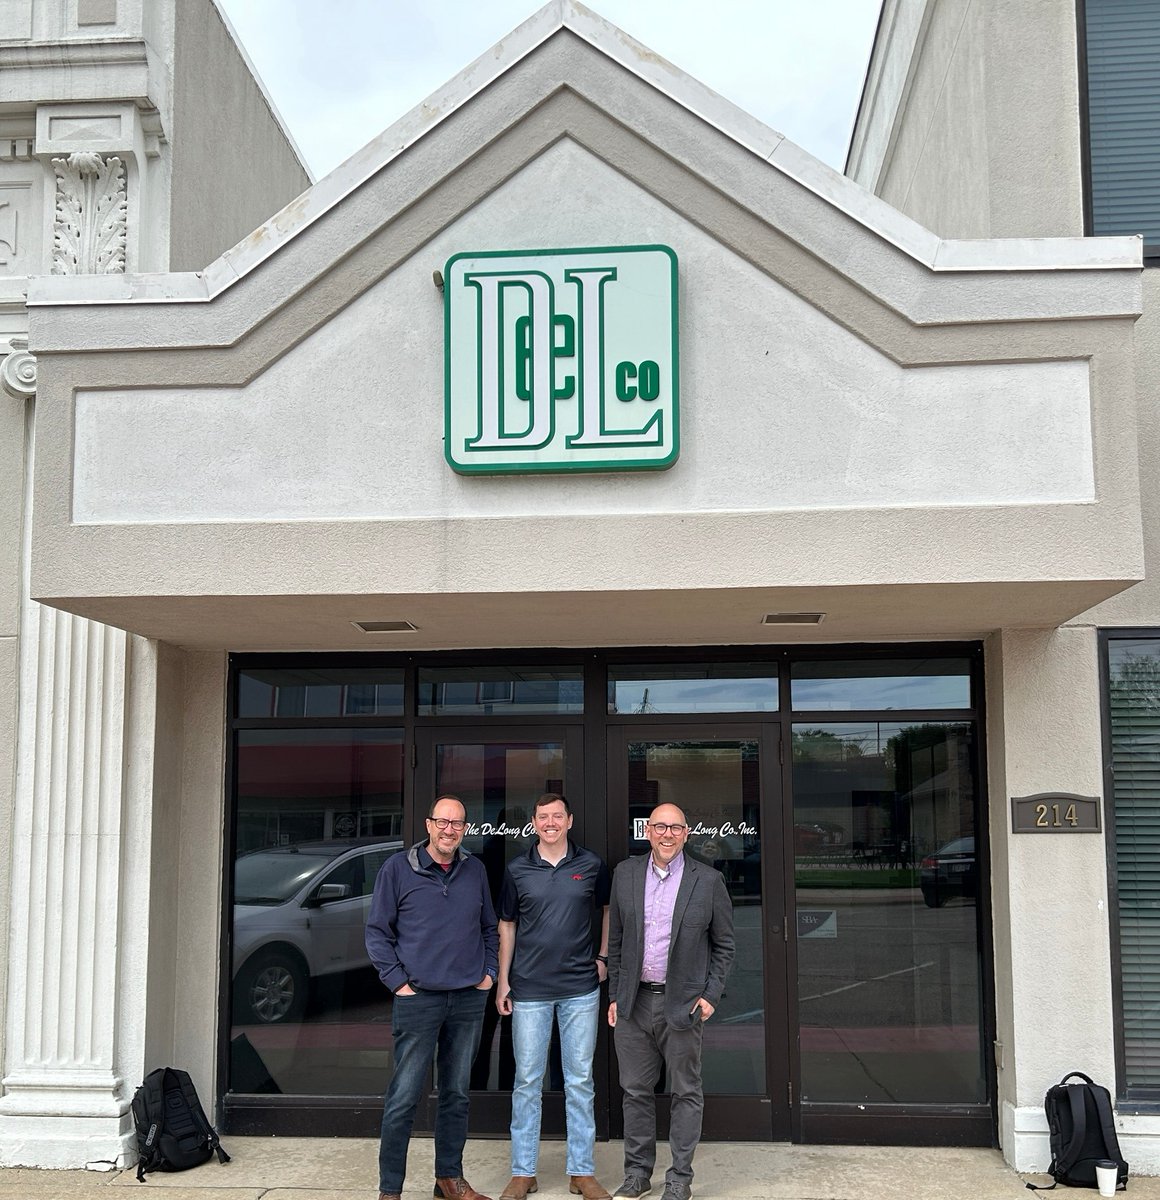 Executive Director Eric Wenberg continued his travels to members with stops at Hang Tung Resources and a new member and user of the @USIDPreserved mark, @DeLongCompany. Thanks for welcoming SSGA!